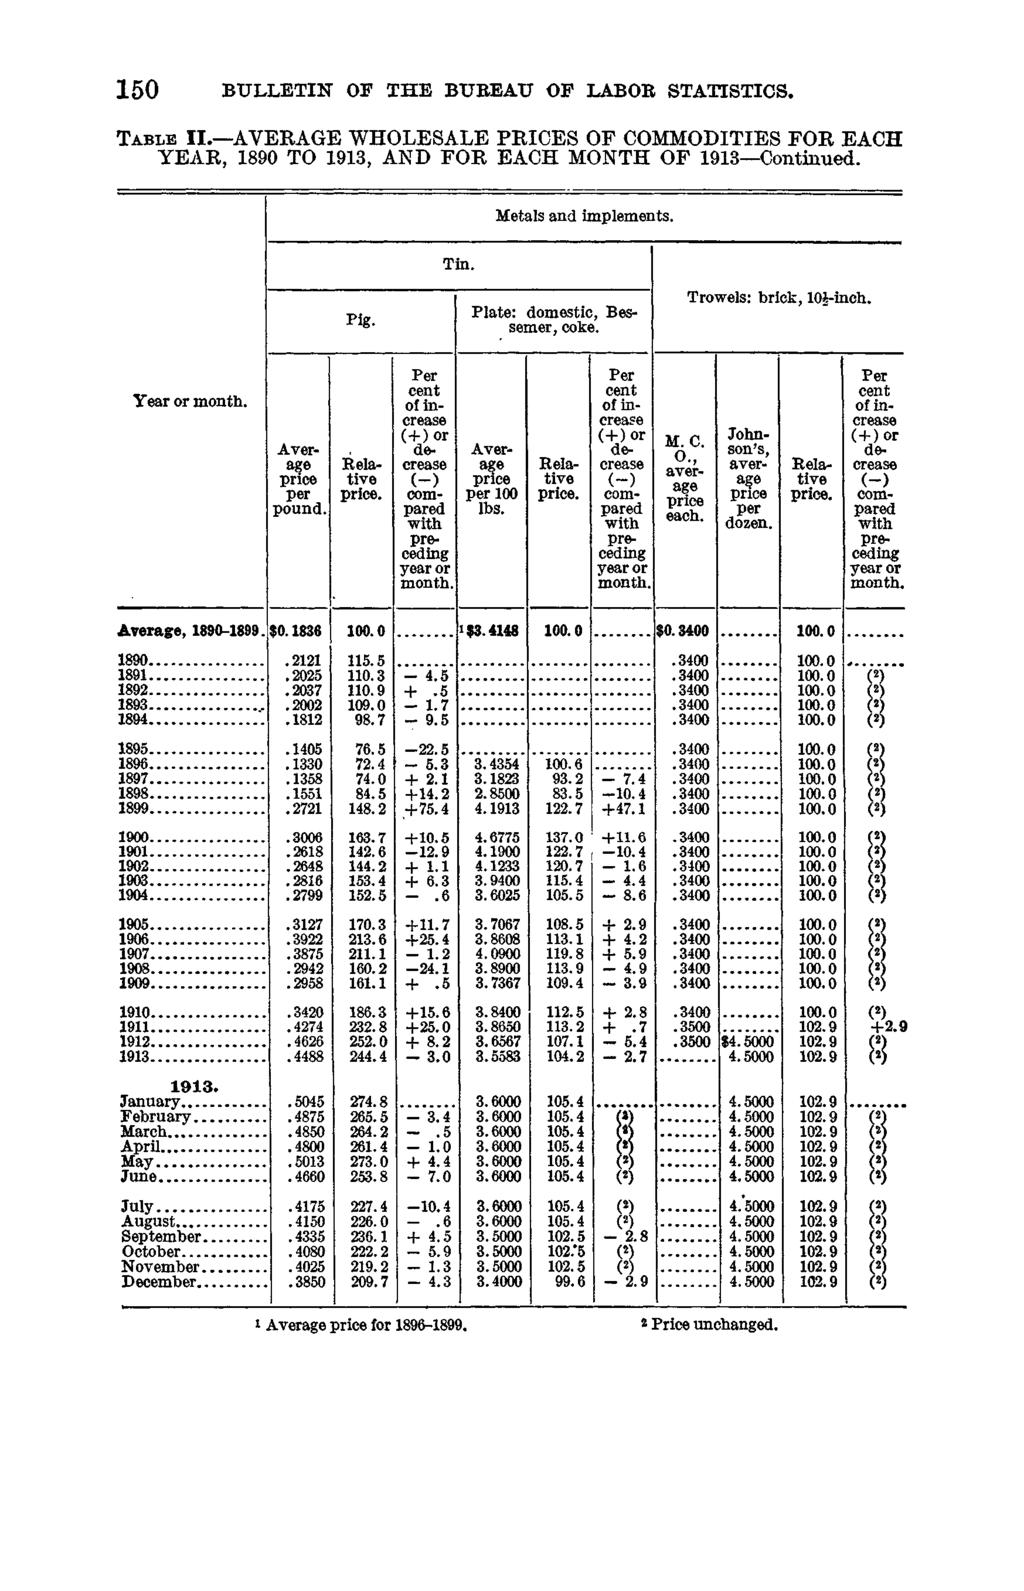 1 5 0 BULLETIN OF THE BUREAU OF LABOR STATISTICS, T a b l e I I. AVERAGE WHOLESALE PRICES OF COMMODITIES FOR EACH YEAR, 1890 TO 1913, AND FOR EACH MONTH OF 1913 Continued. Metals and implements. Tin.